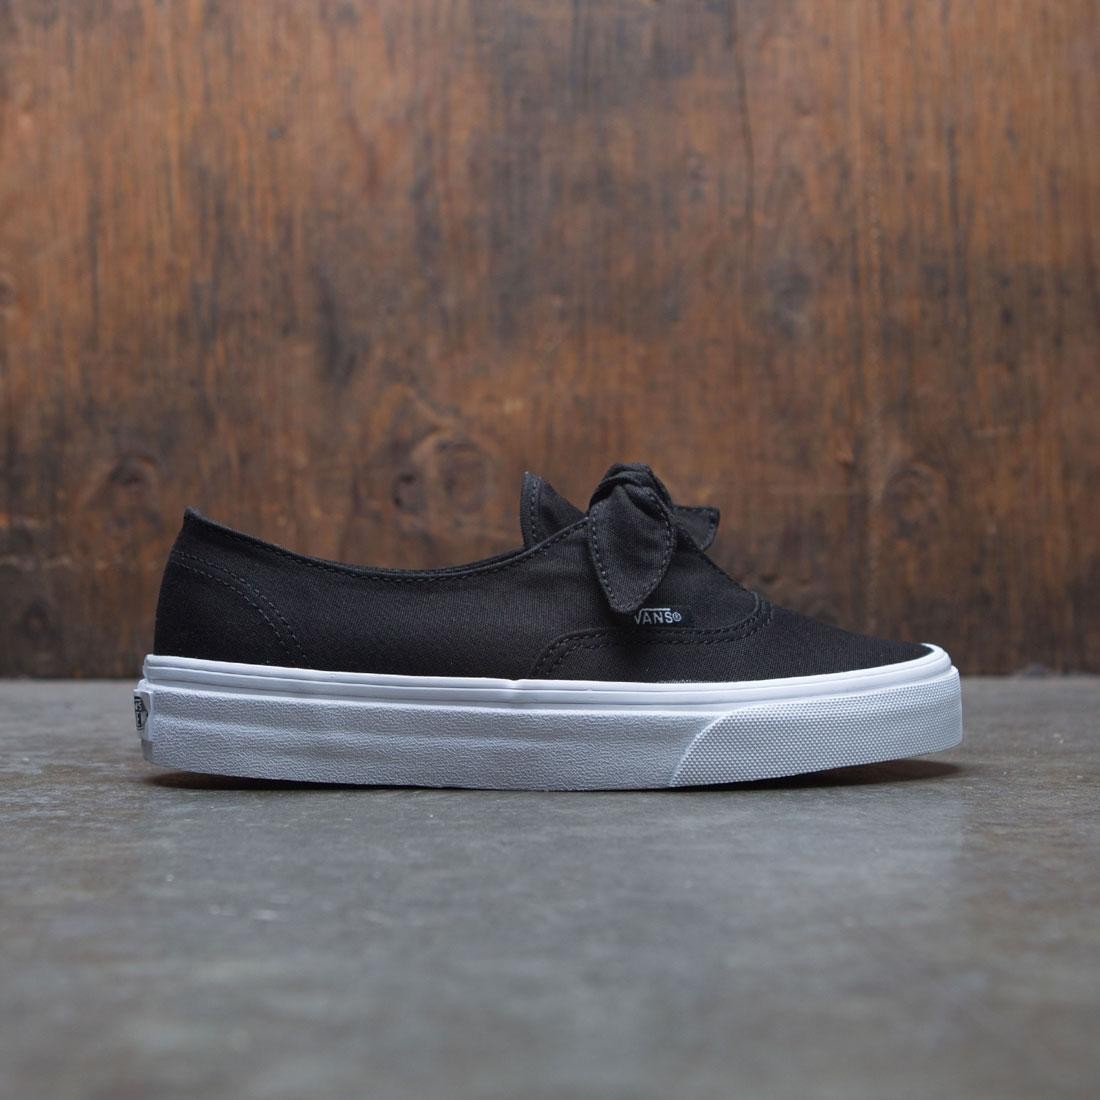 black and white authentic